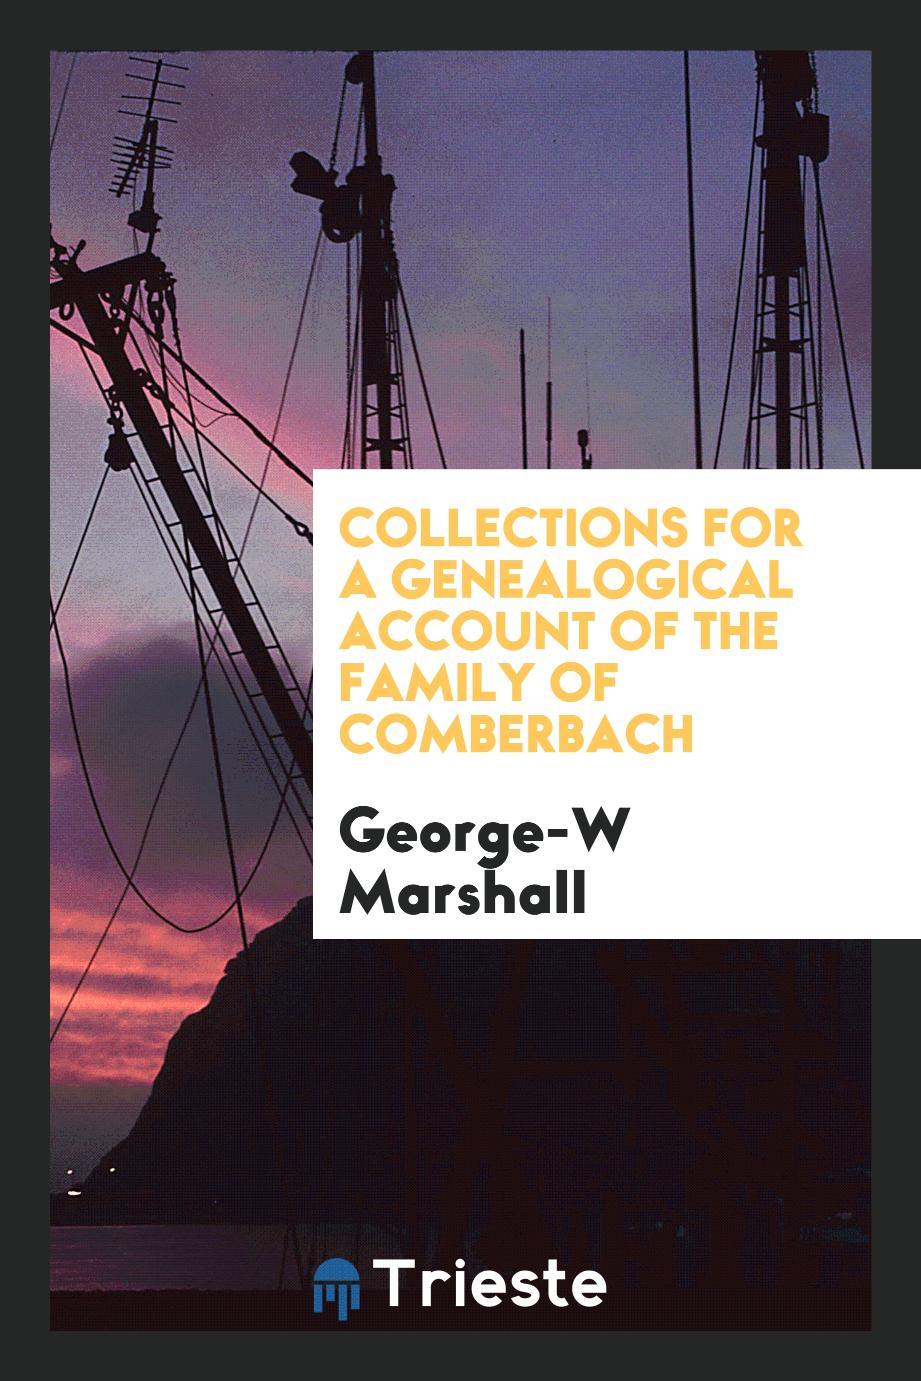 Collections for a genealogical account of the family of Comberbach